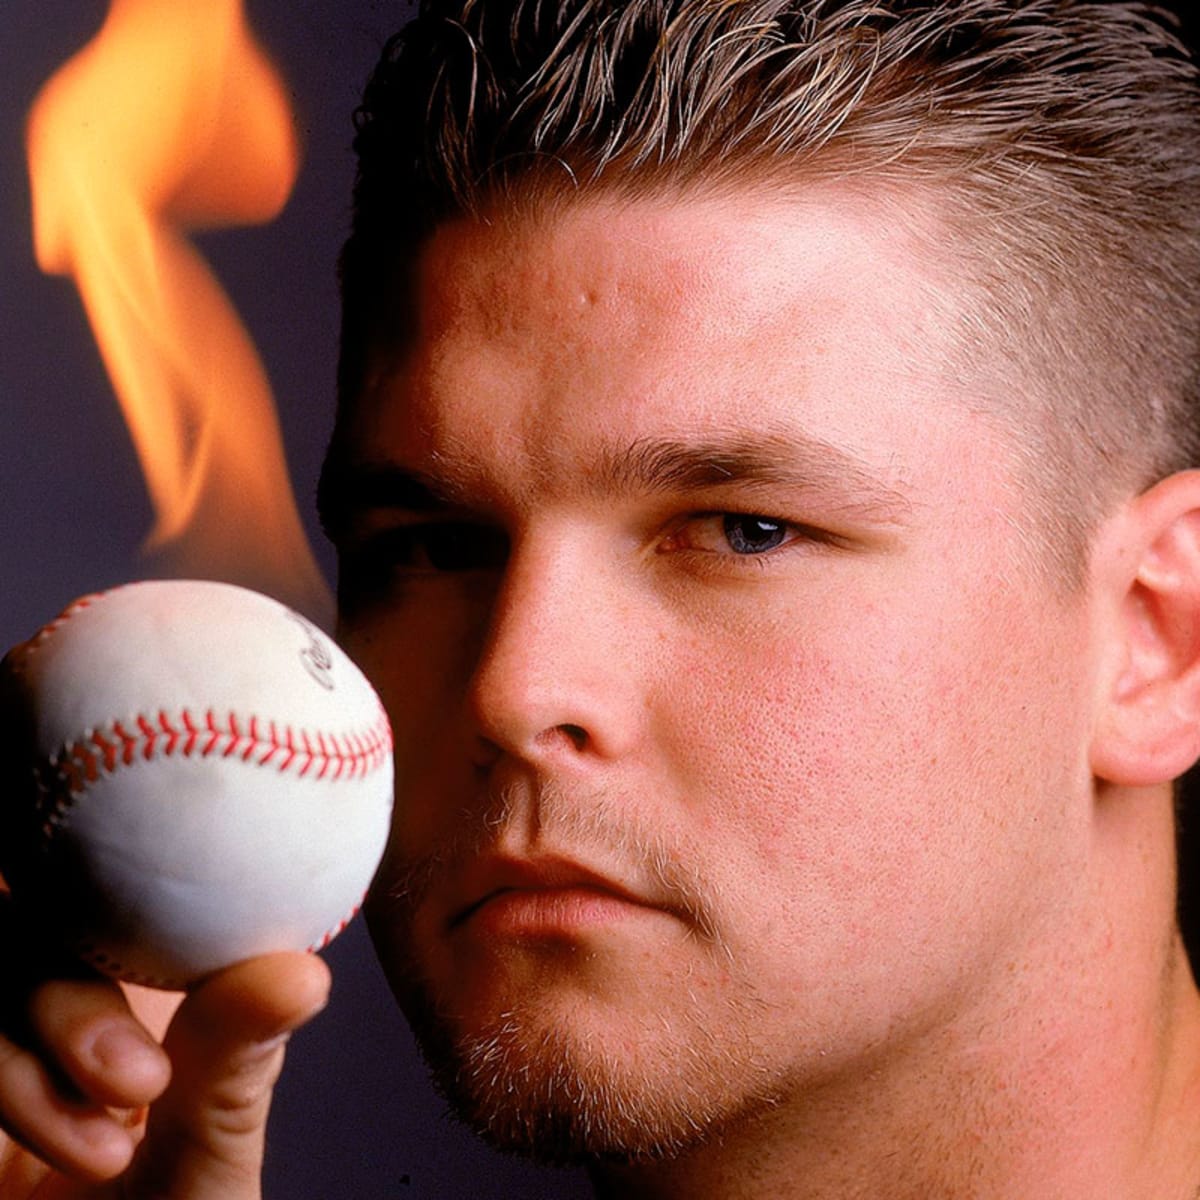 Kerry Wood's 20 Strikeout Game, batting, Major League Baseball, On this  day in 1998, a 20-year-old Kerry Wood struck out 20 batters to tie the  major league record., By Chicago Cubs